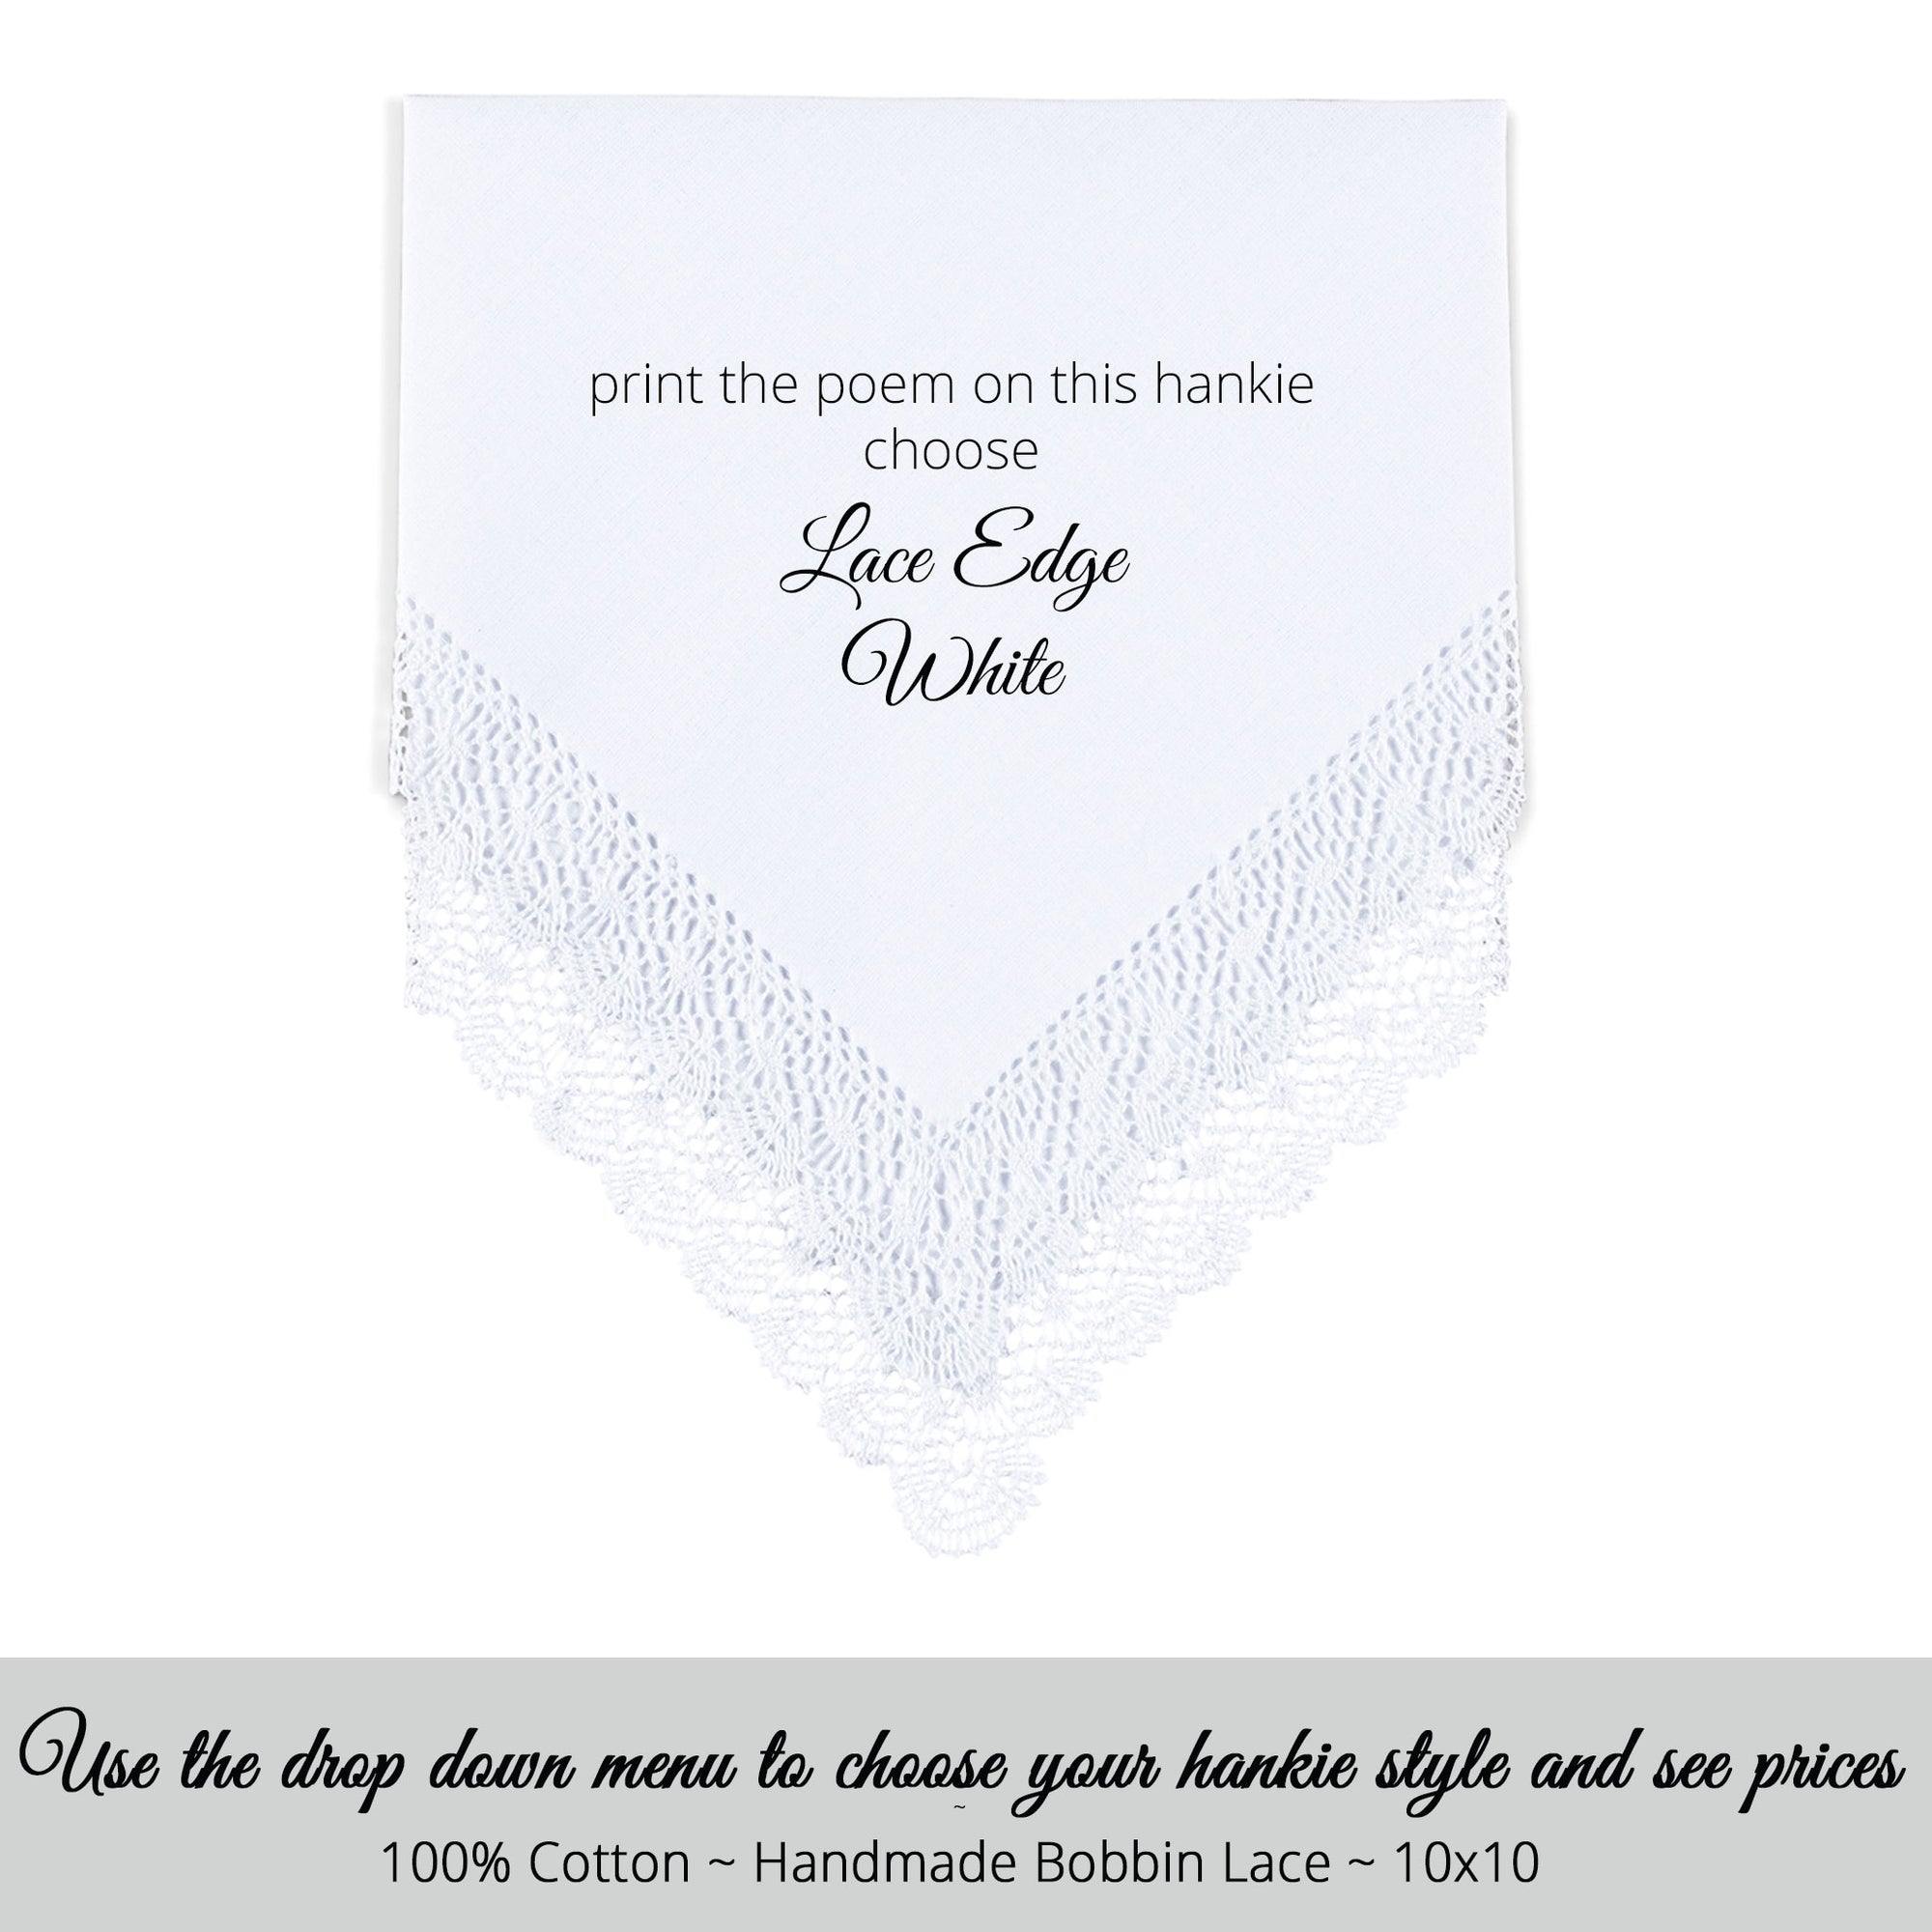 Wedding Handkerchief white with bobbin lace poem printed hankie for the flower girl